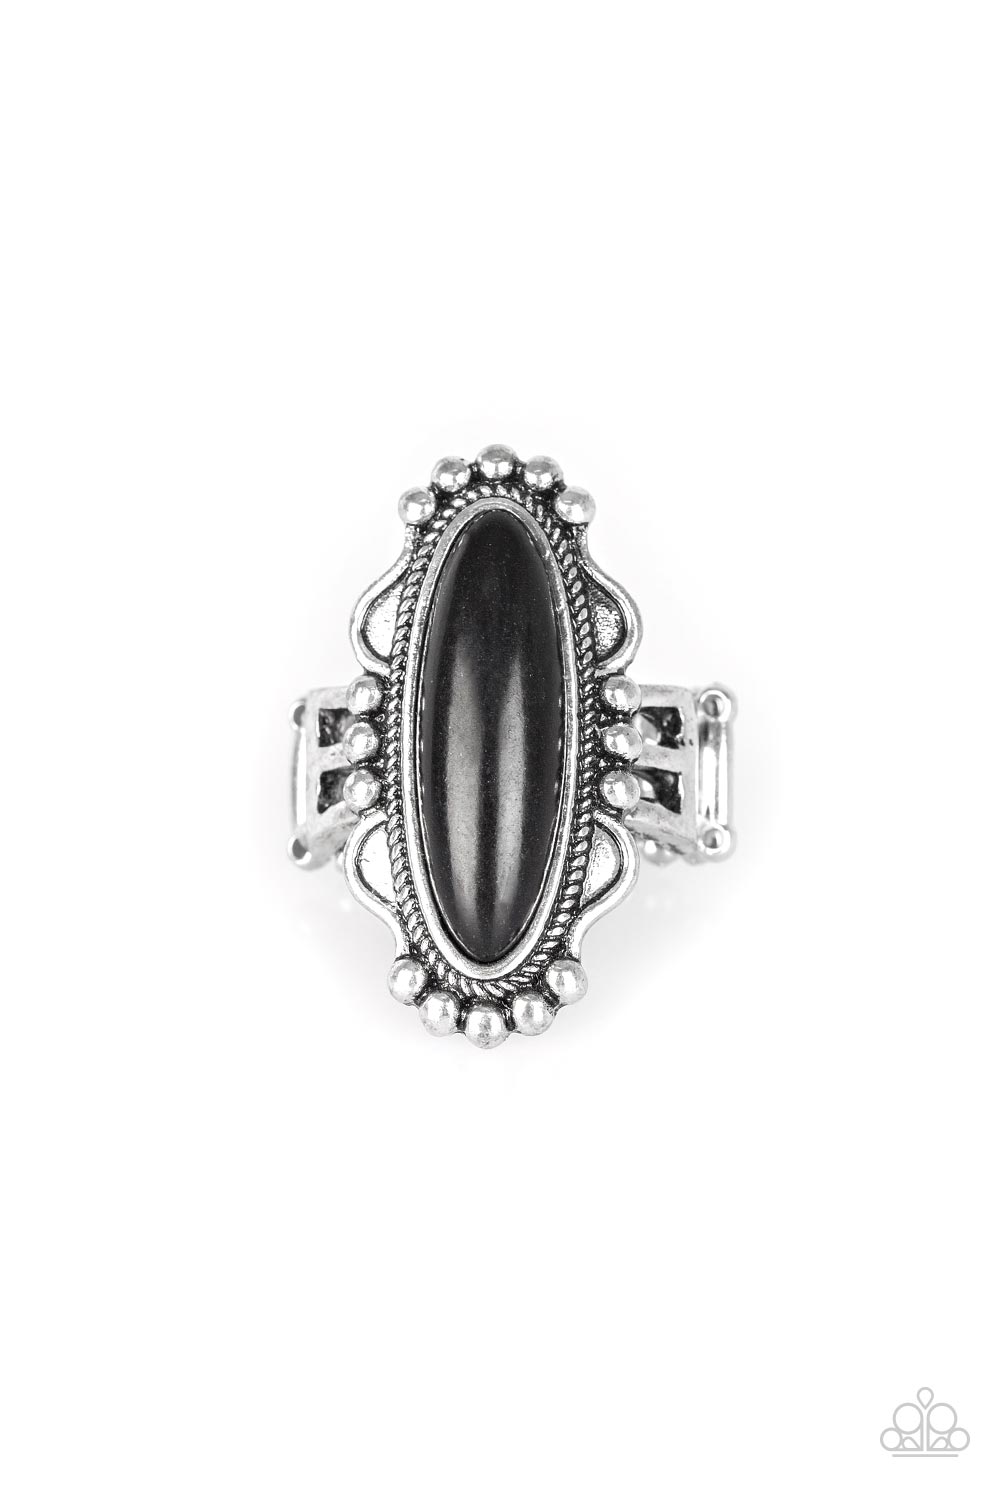 Leave No Trace - black - Paparazzi ring